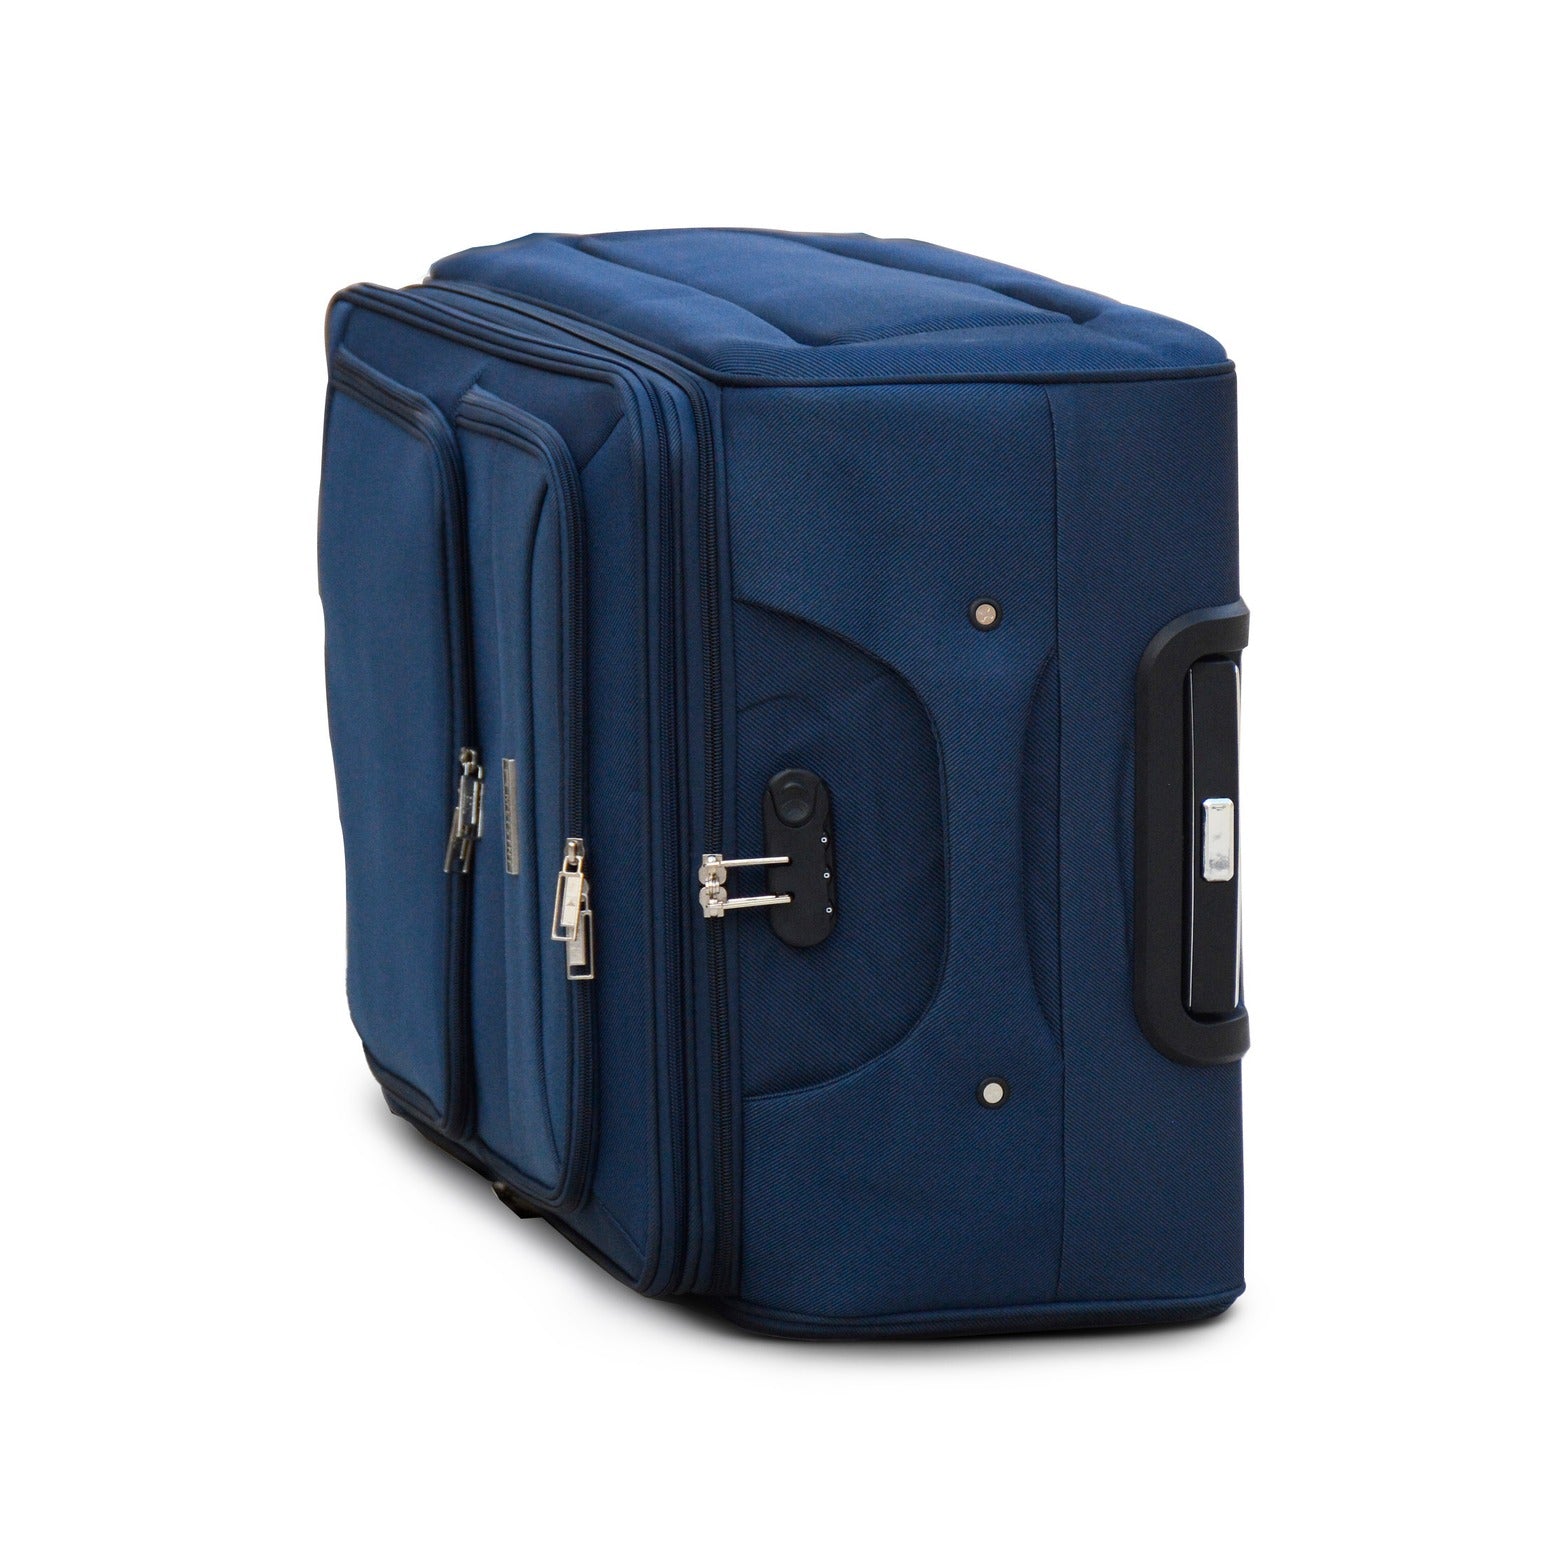 4 Piece Full Set 20" 24" 28" 32 Inches Blue Colour LP 2 Wheel 0161 Lightweight Soft Material Luggage Bag